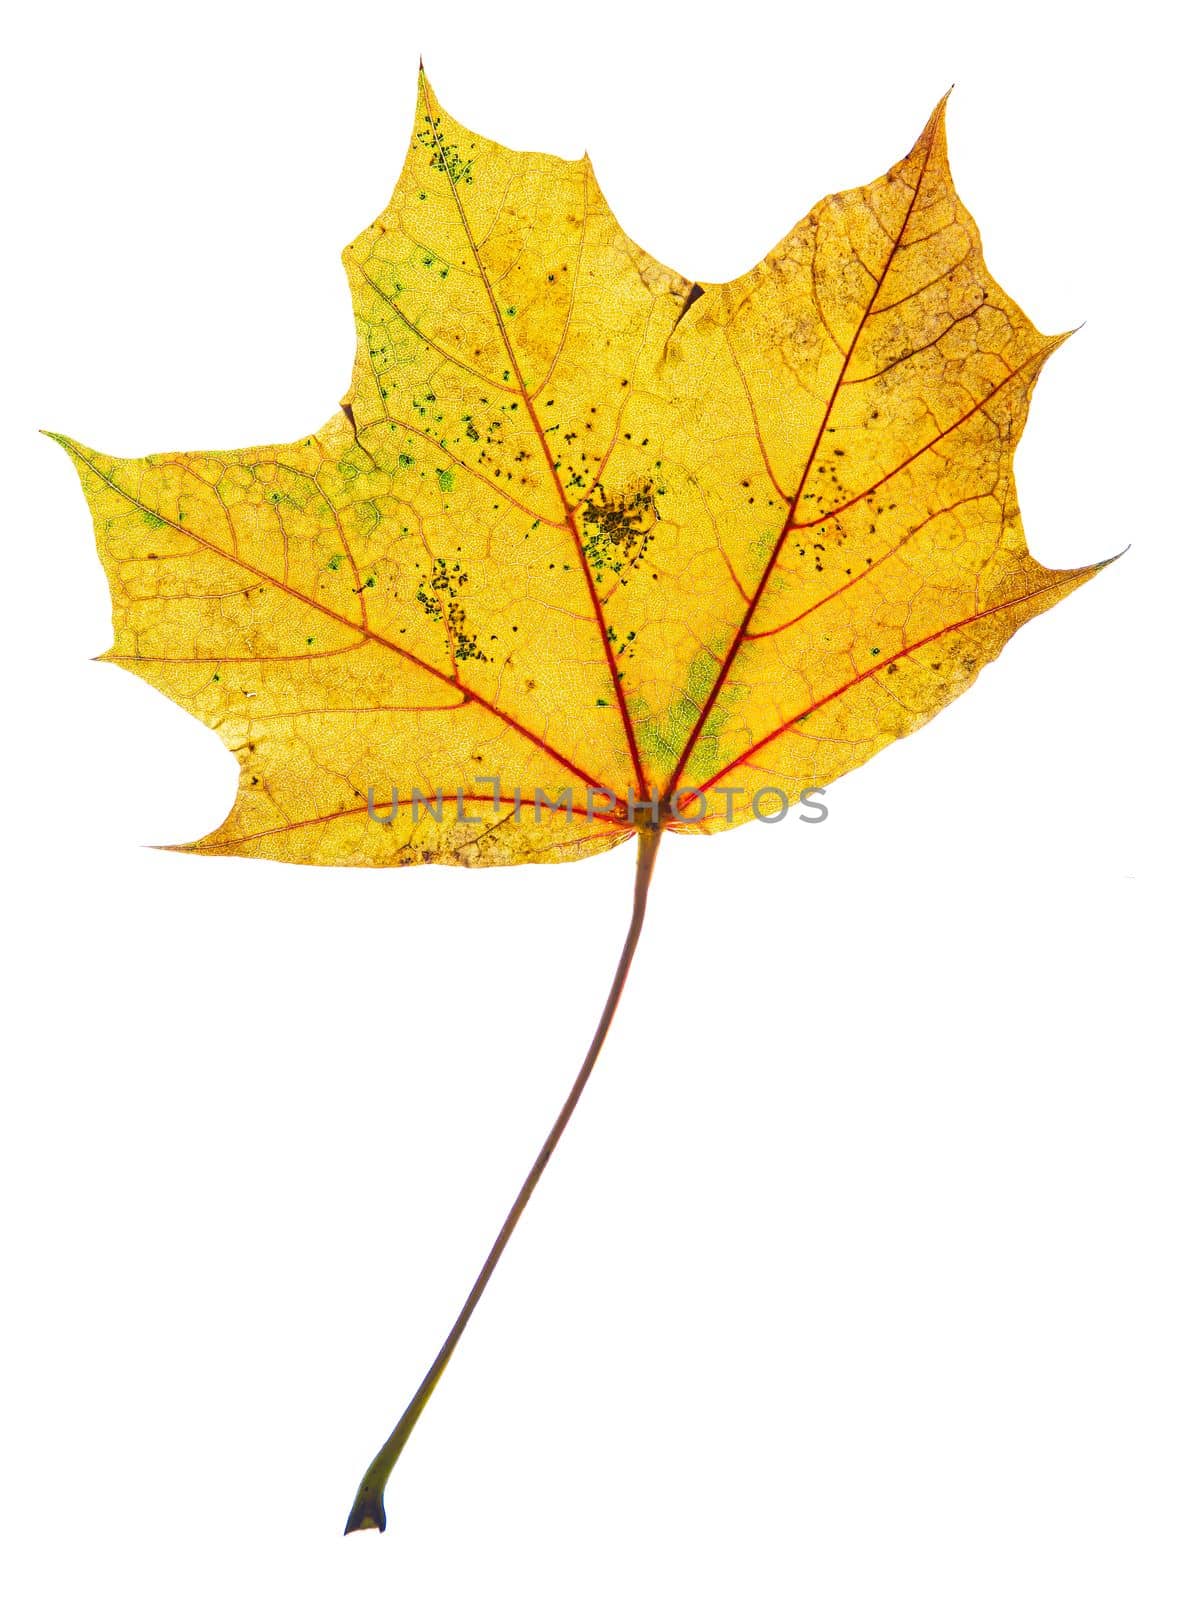 Isolated yellow maple leaf with hints of green and brown